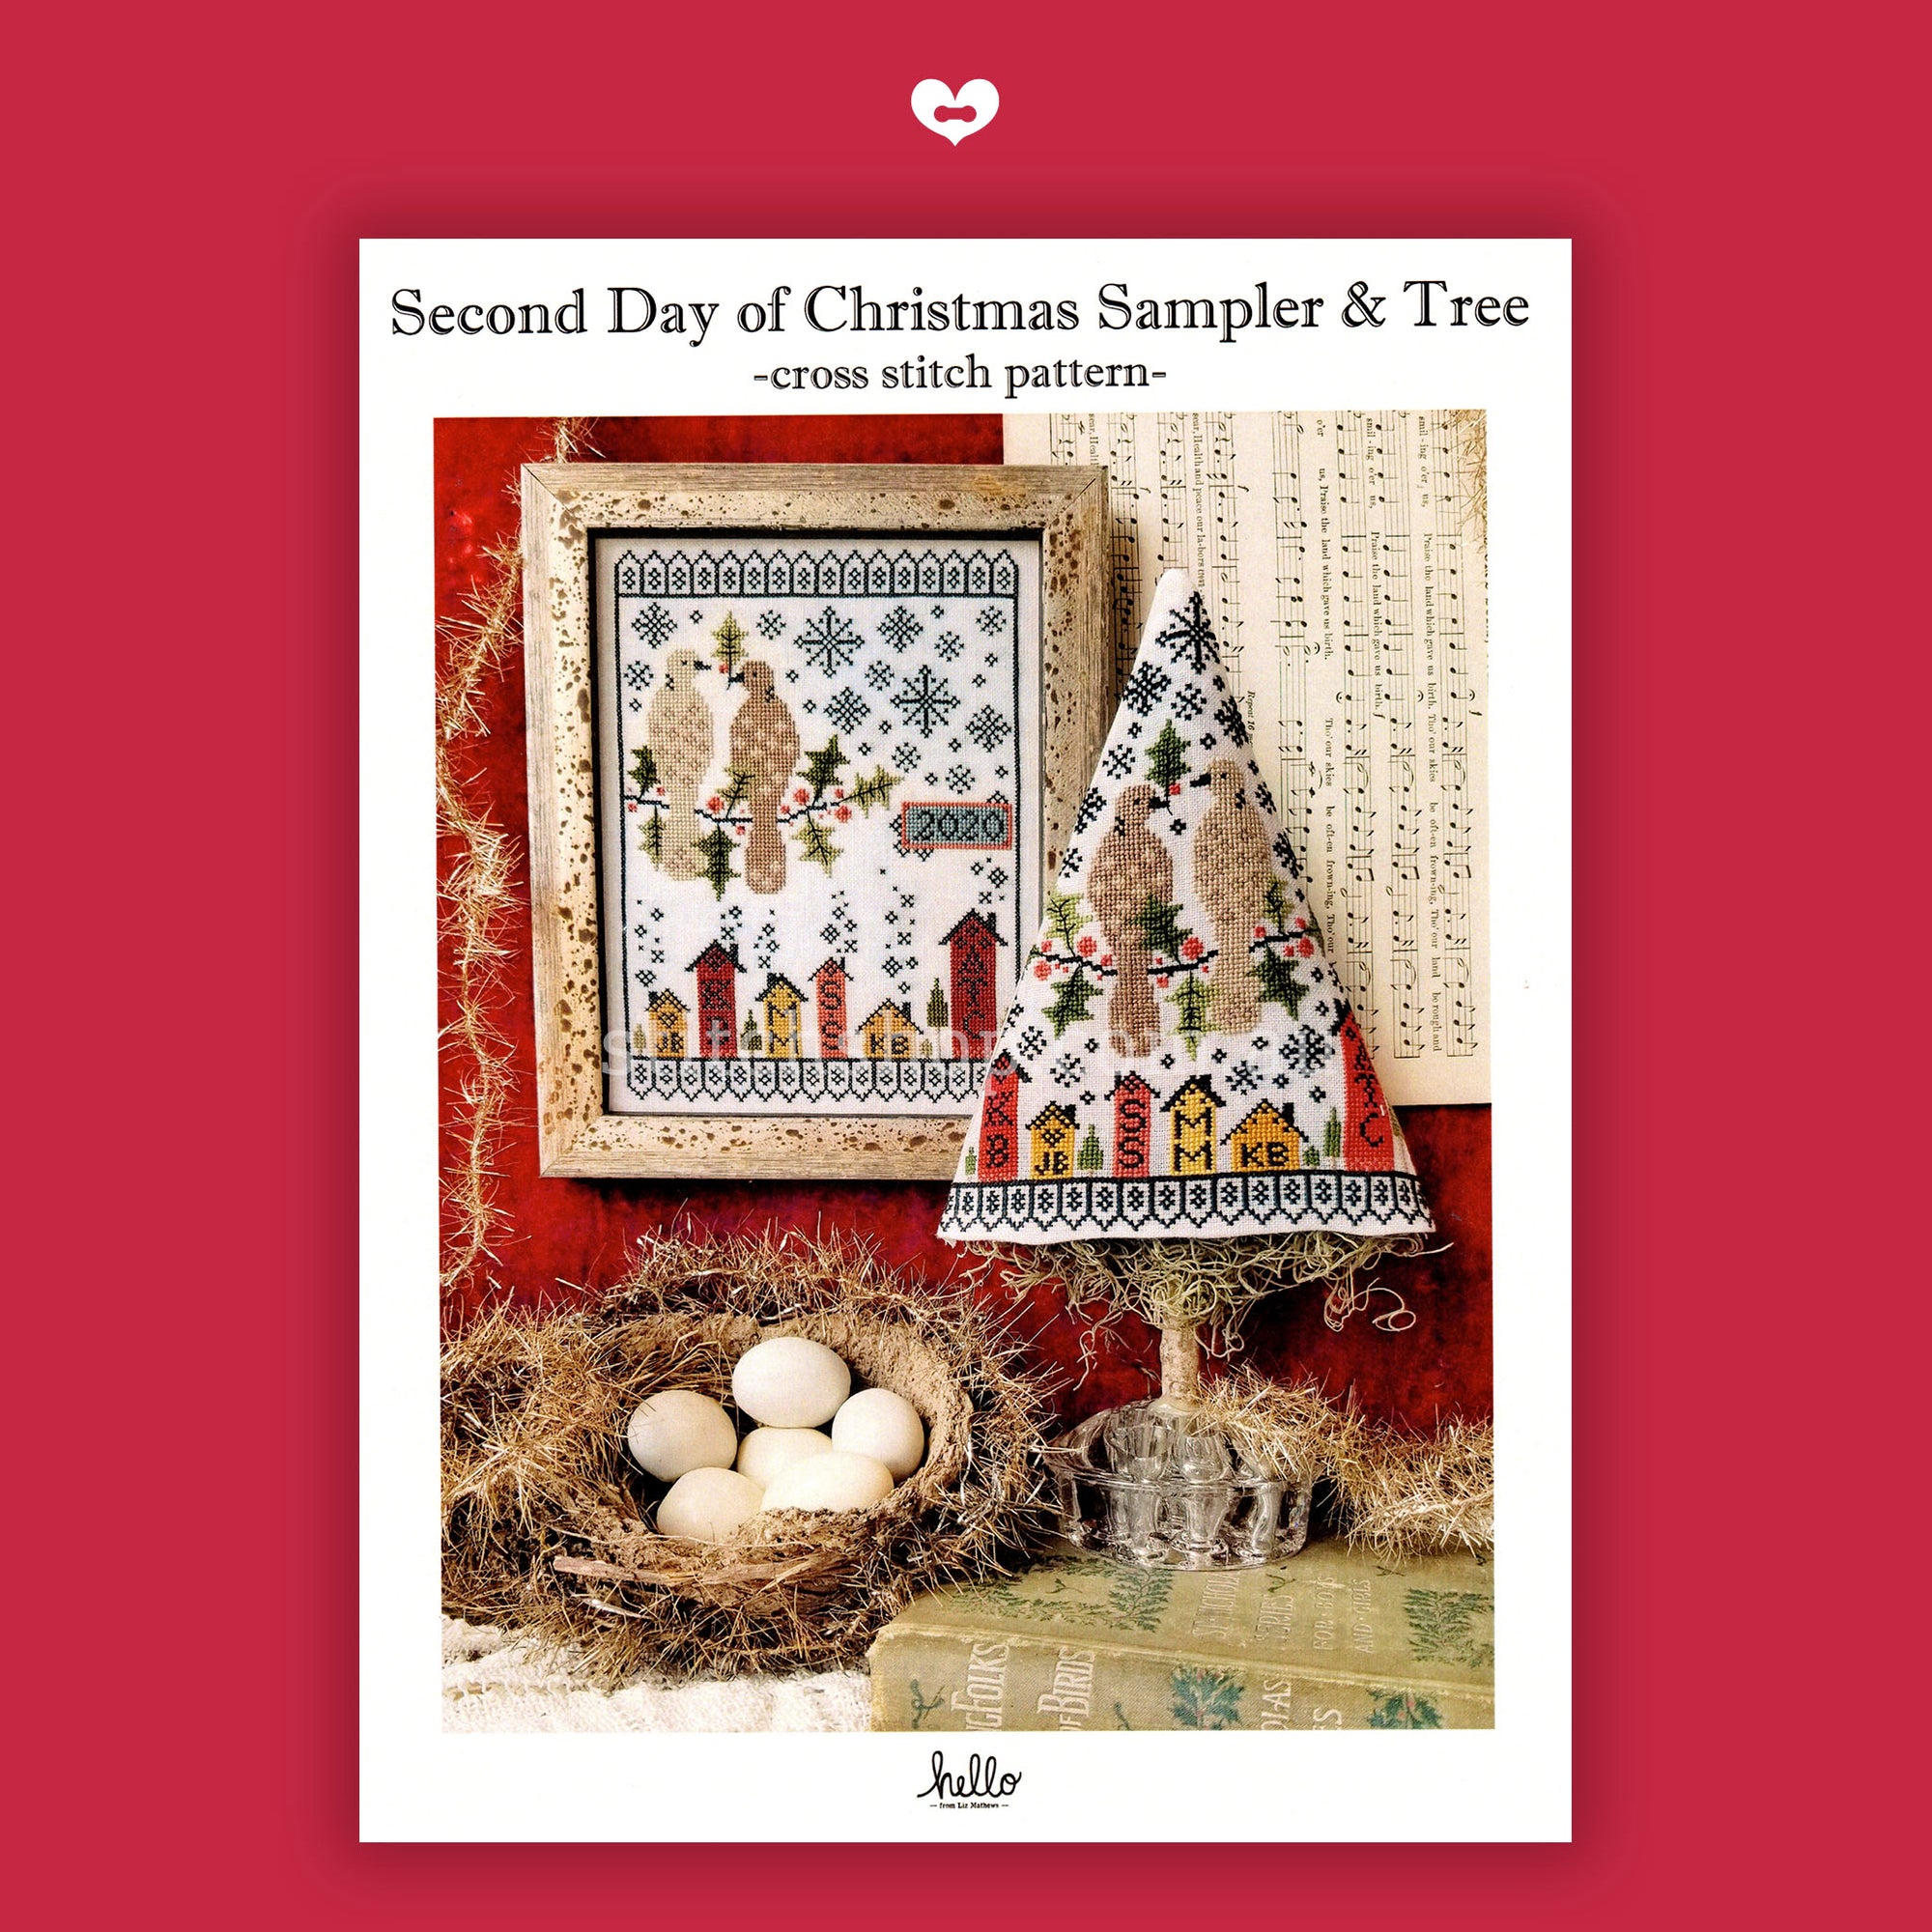 Second Day of Christmas Sampler & Tree